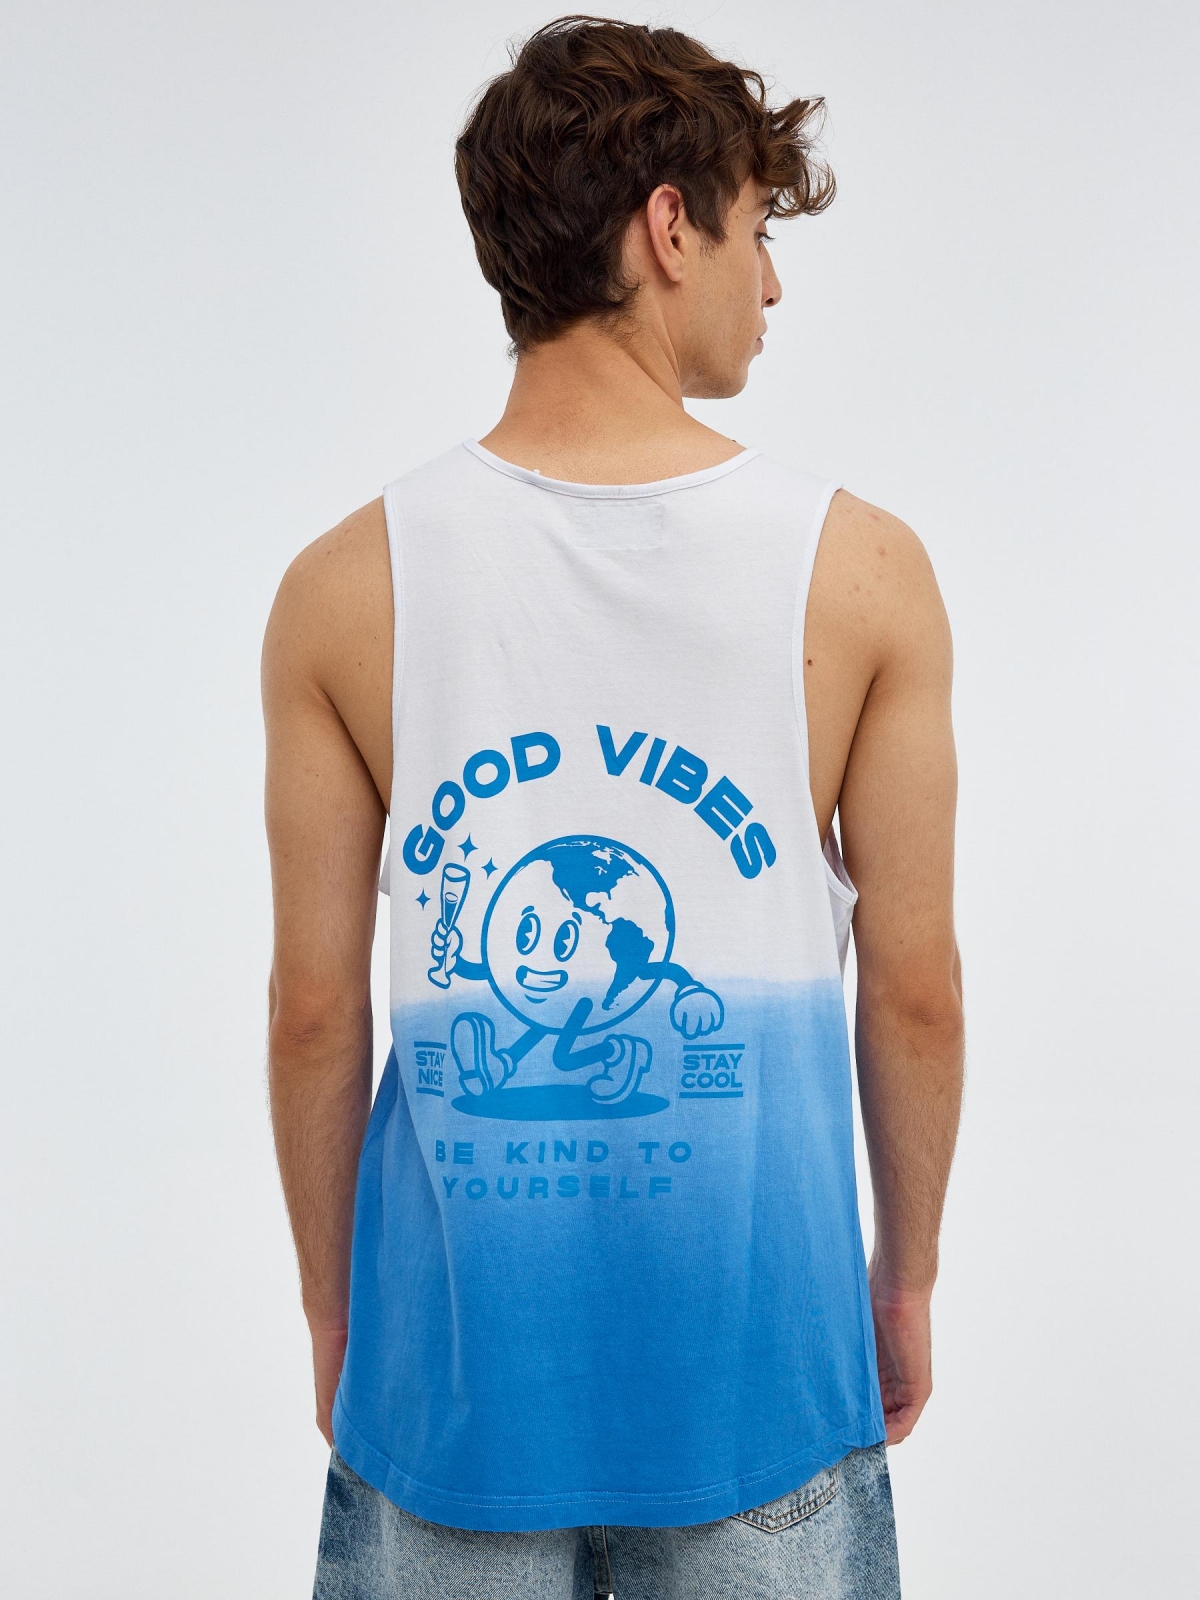 Degraded tank top electric blue middle back view